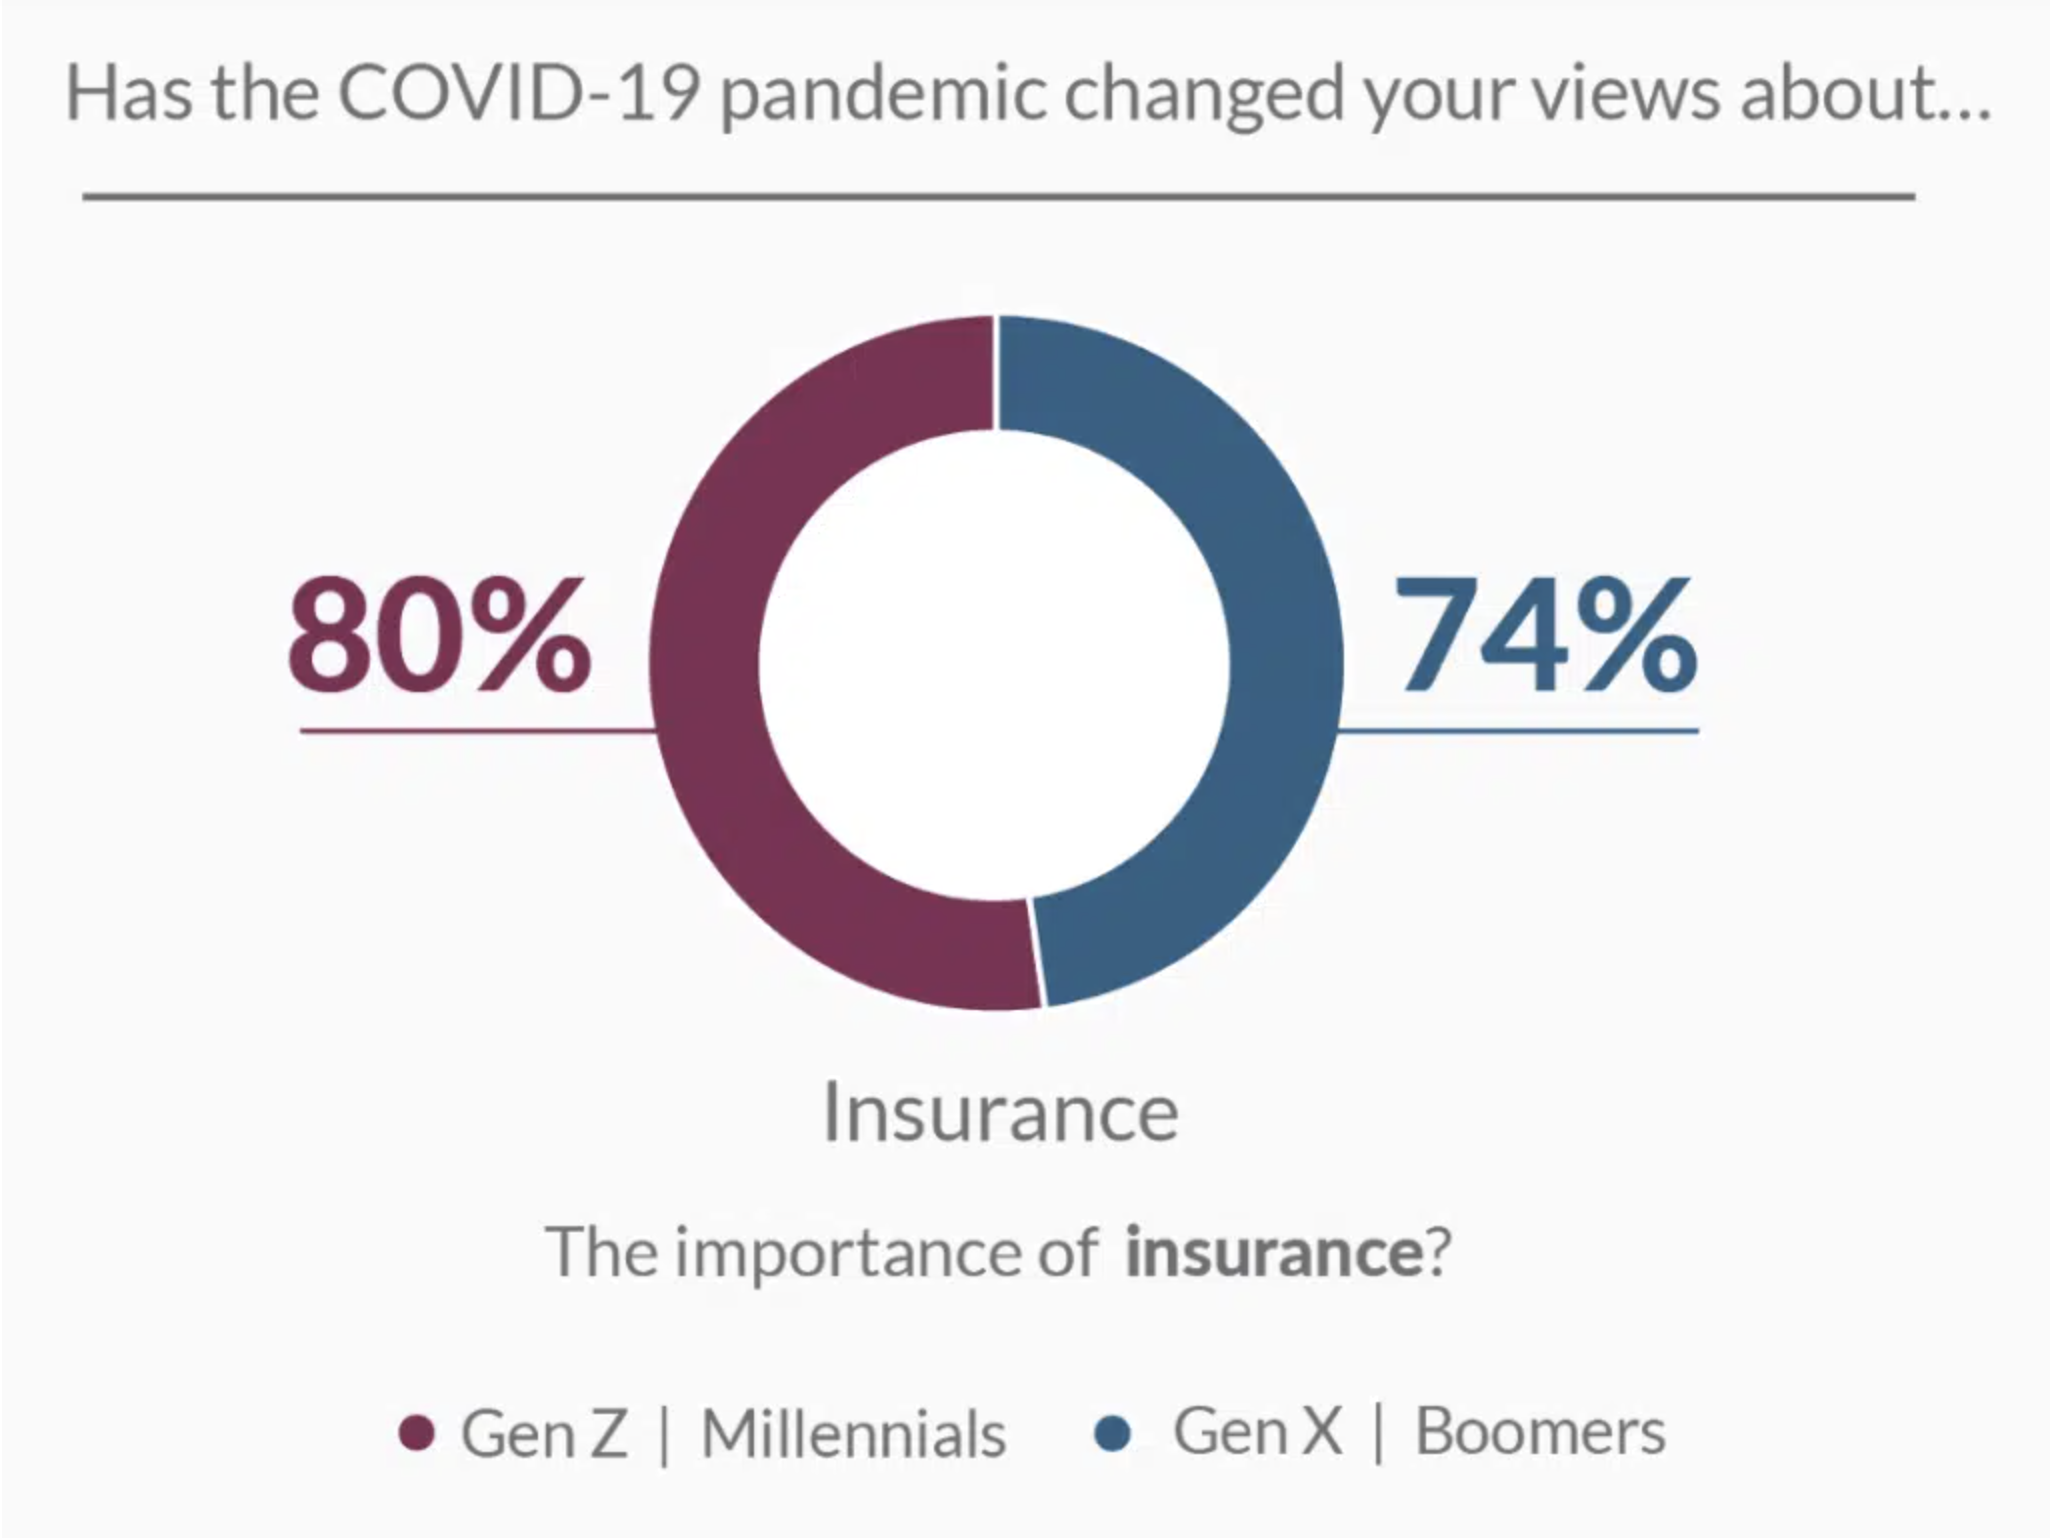 COVID's impact on the importance of insurance